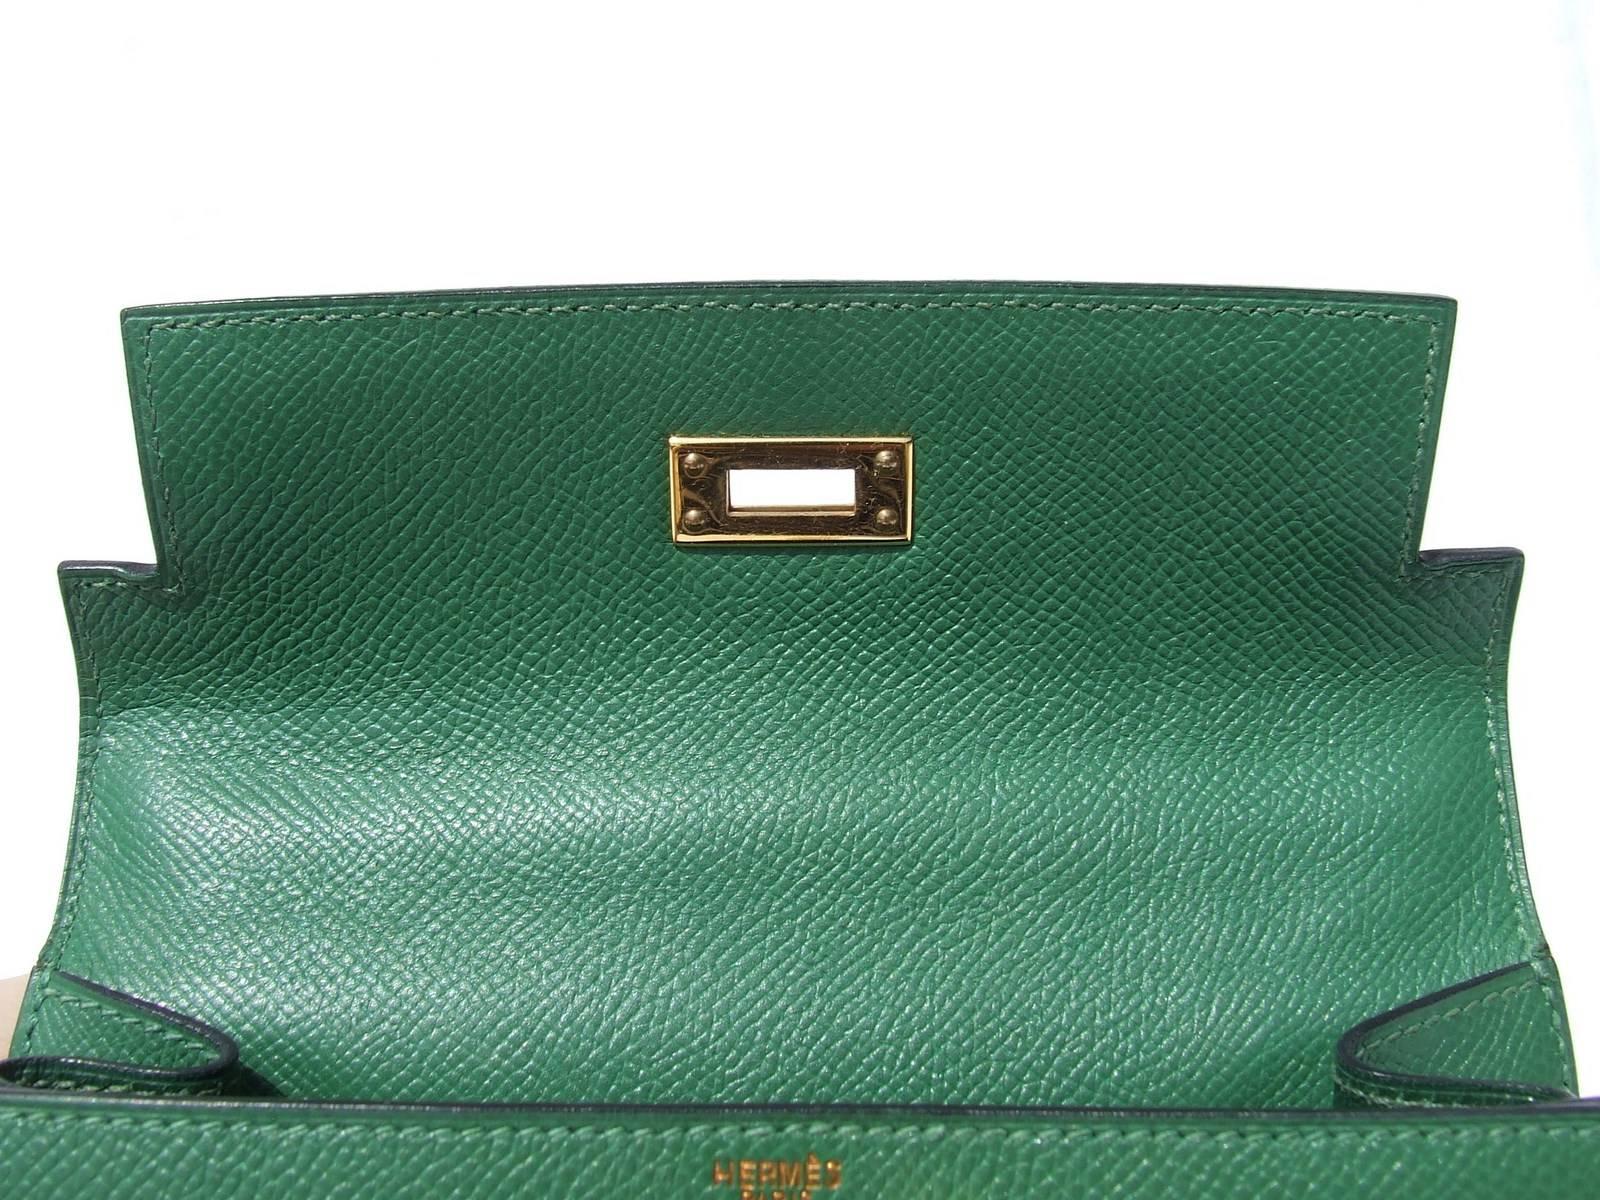 Rare Hermes Mini Kelly 20 cm Sellier Bag Green Courchevel Leather GHW  2